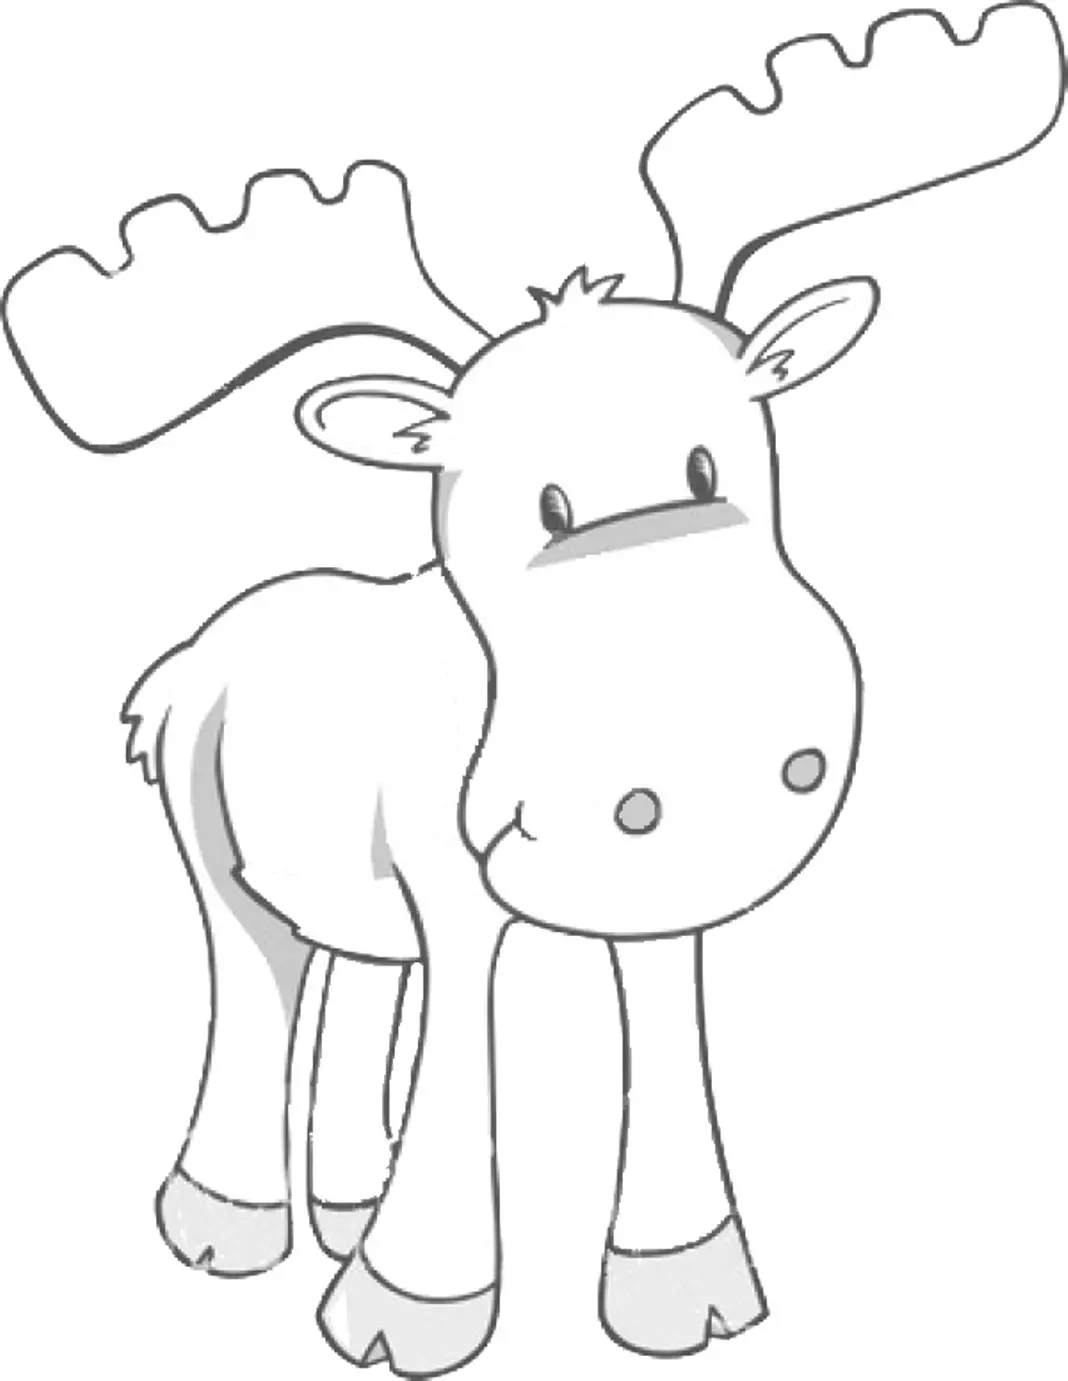 Adorable elk coloring page for kids